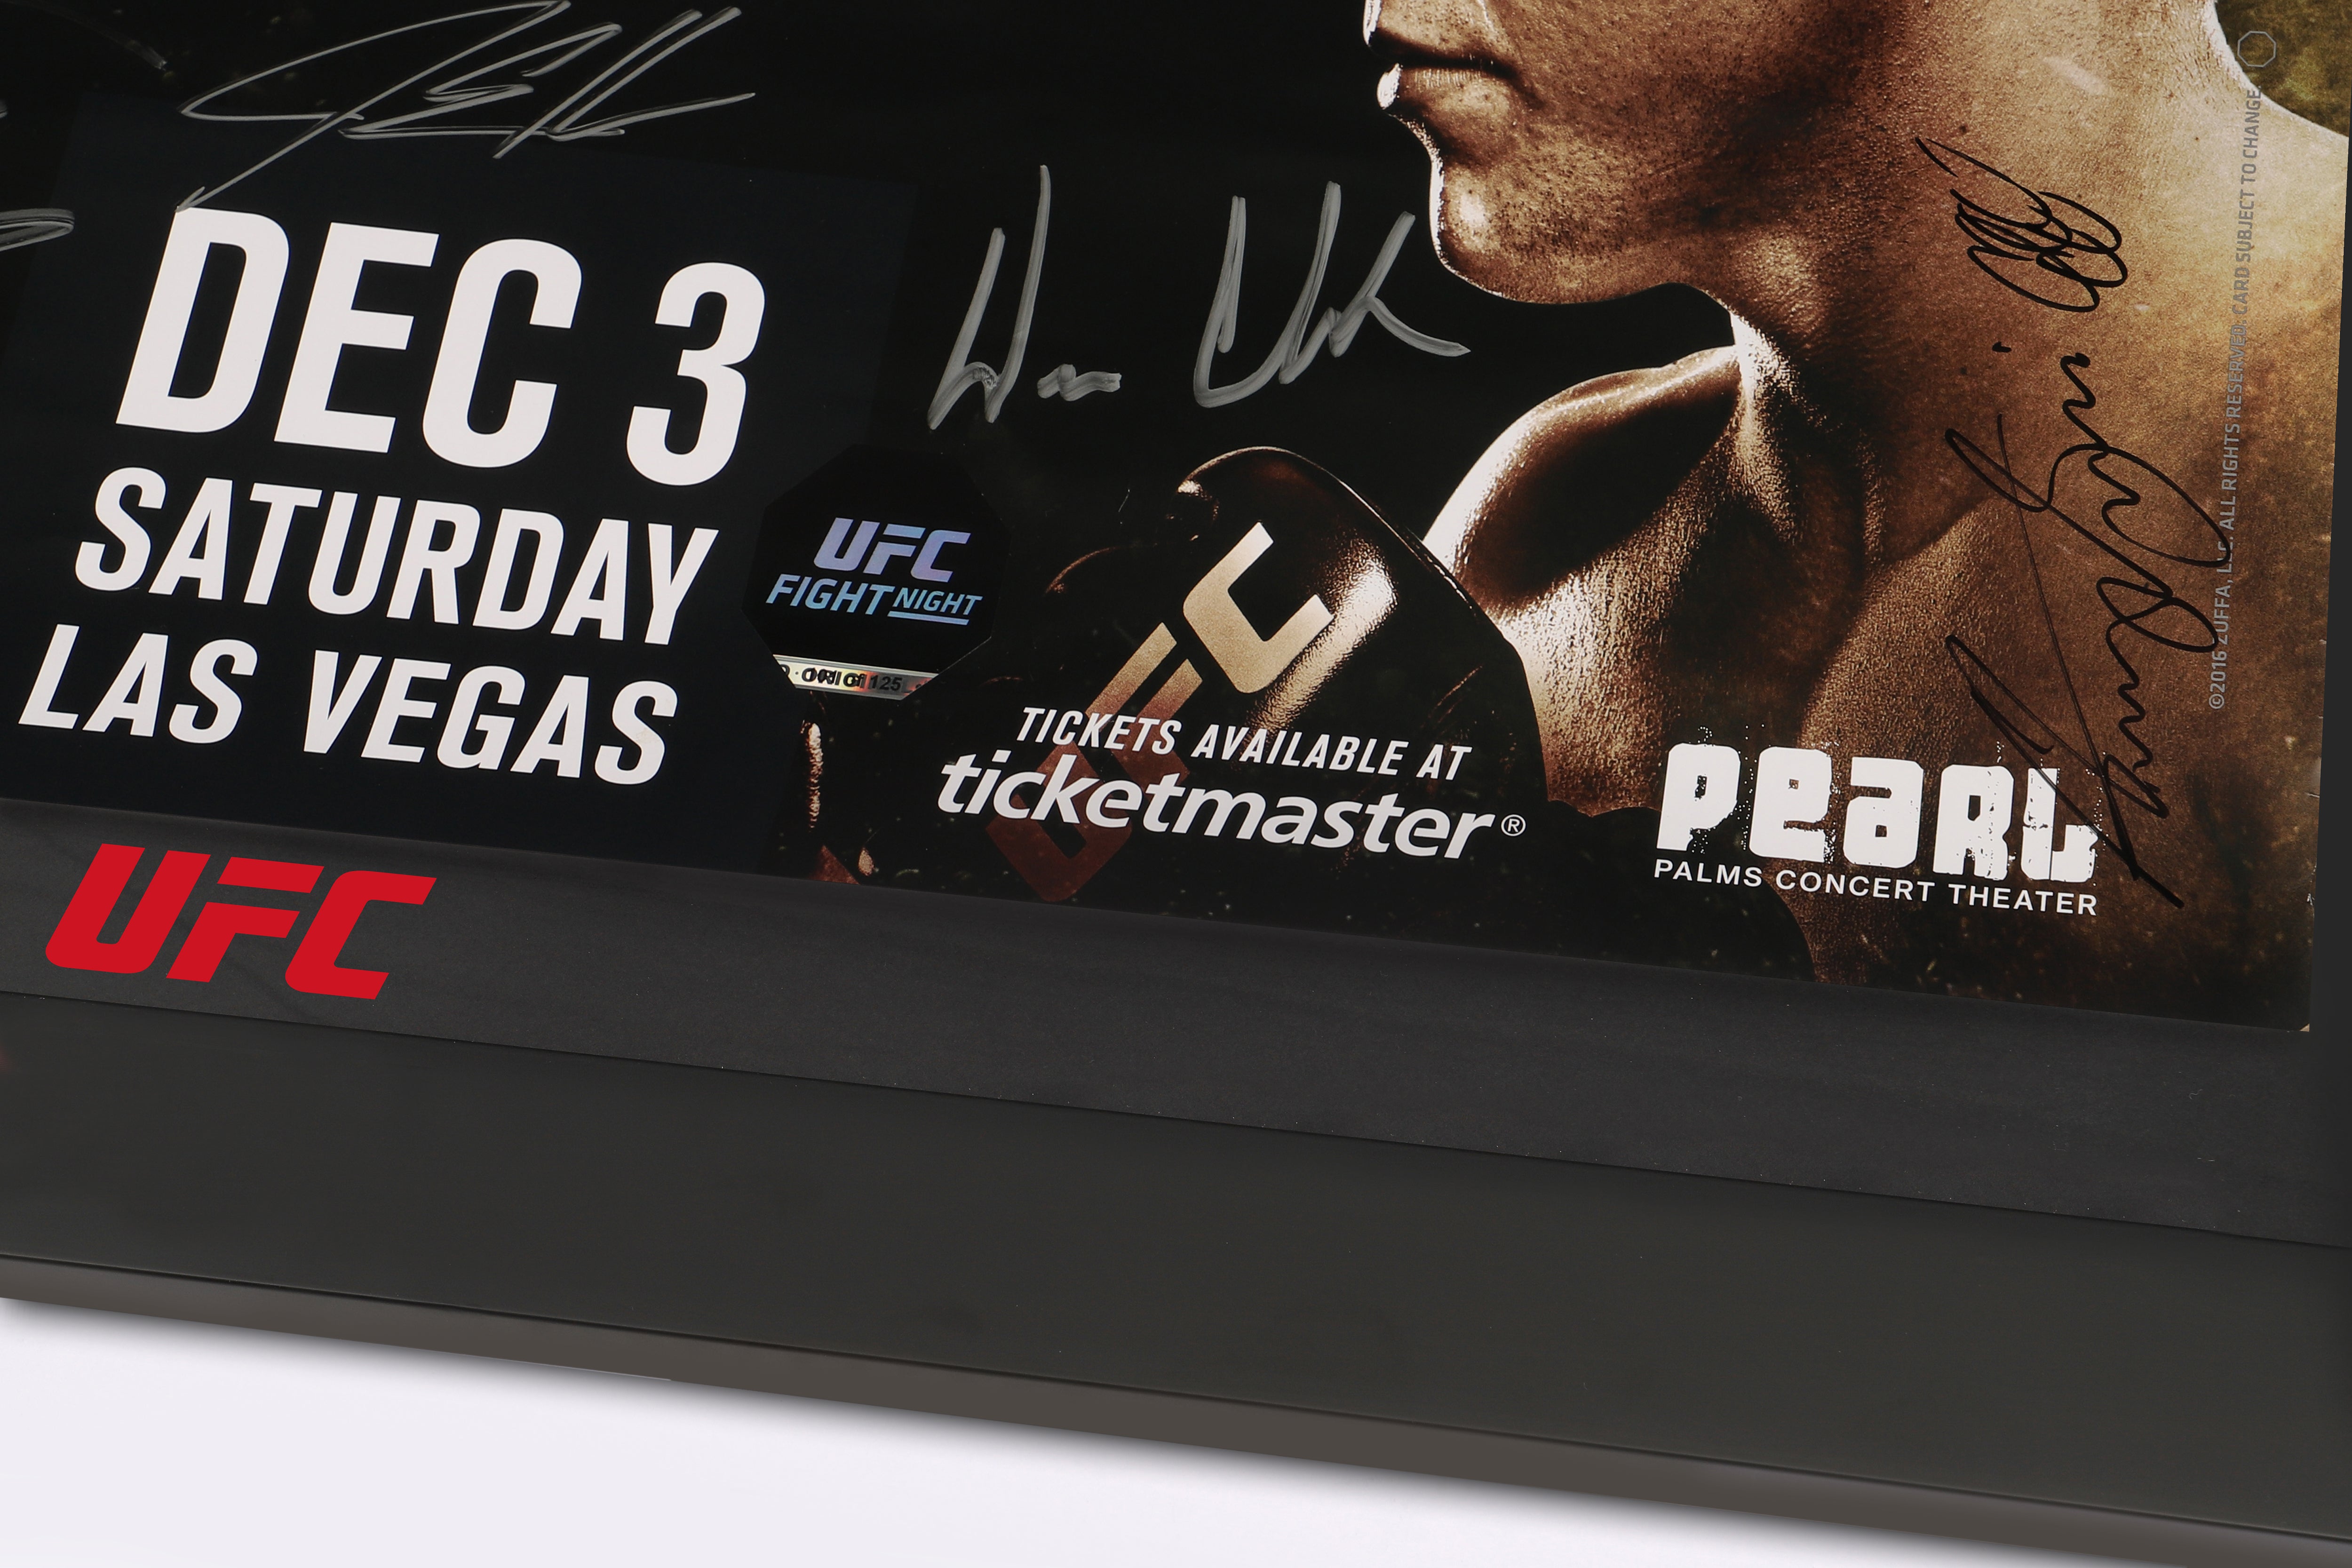 TUF 24: Tournament of Champions Autographed Event Poster